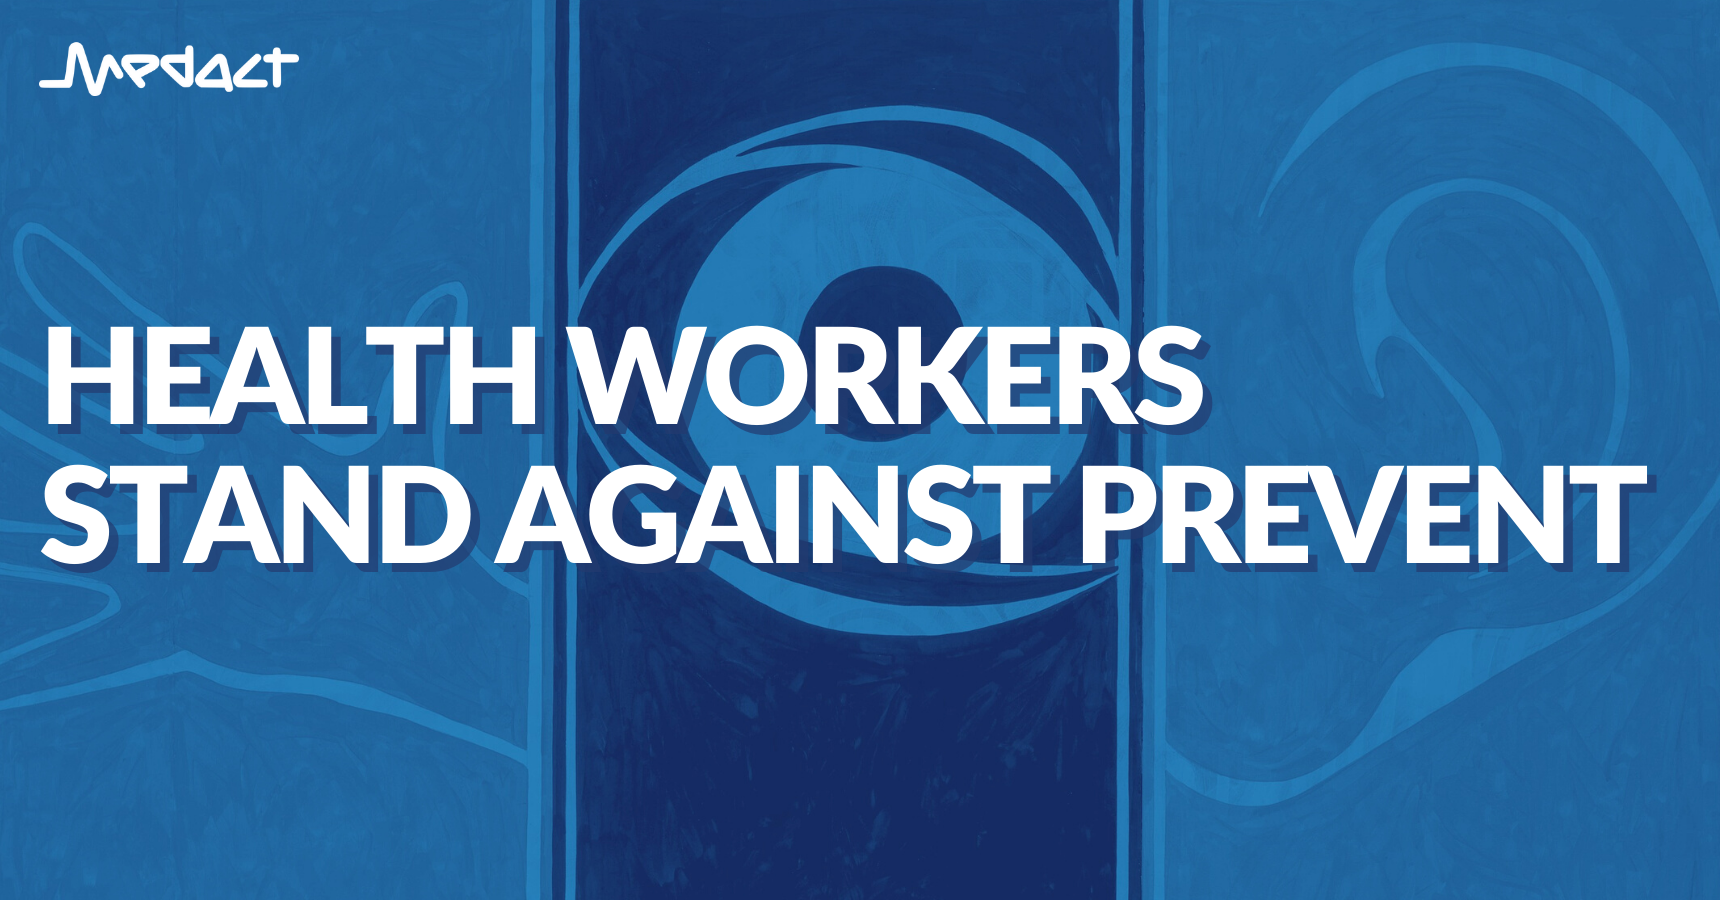 Health workers stand against Prevent